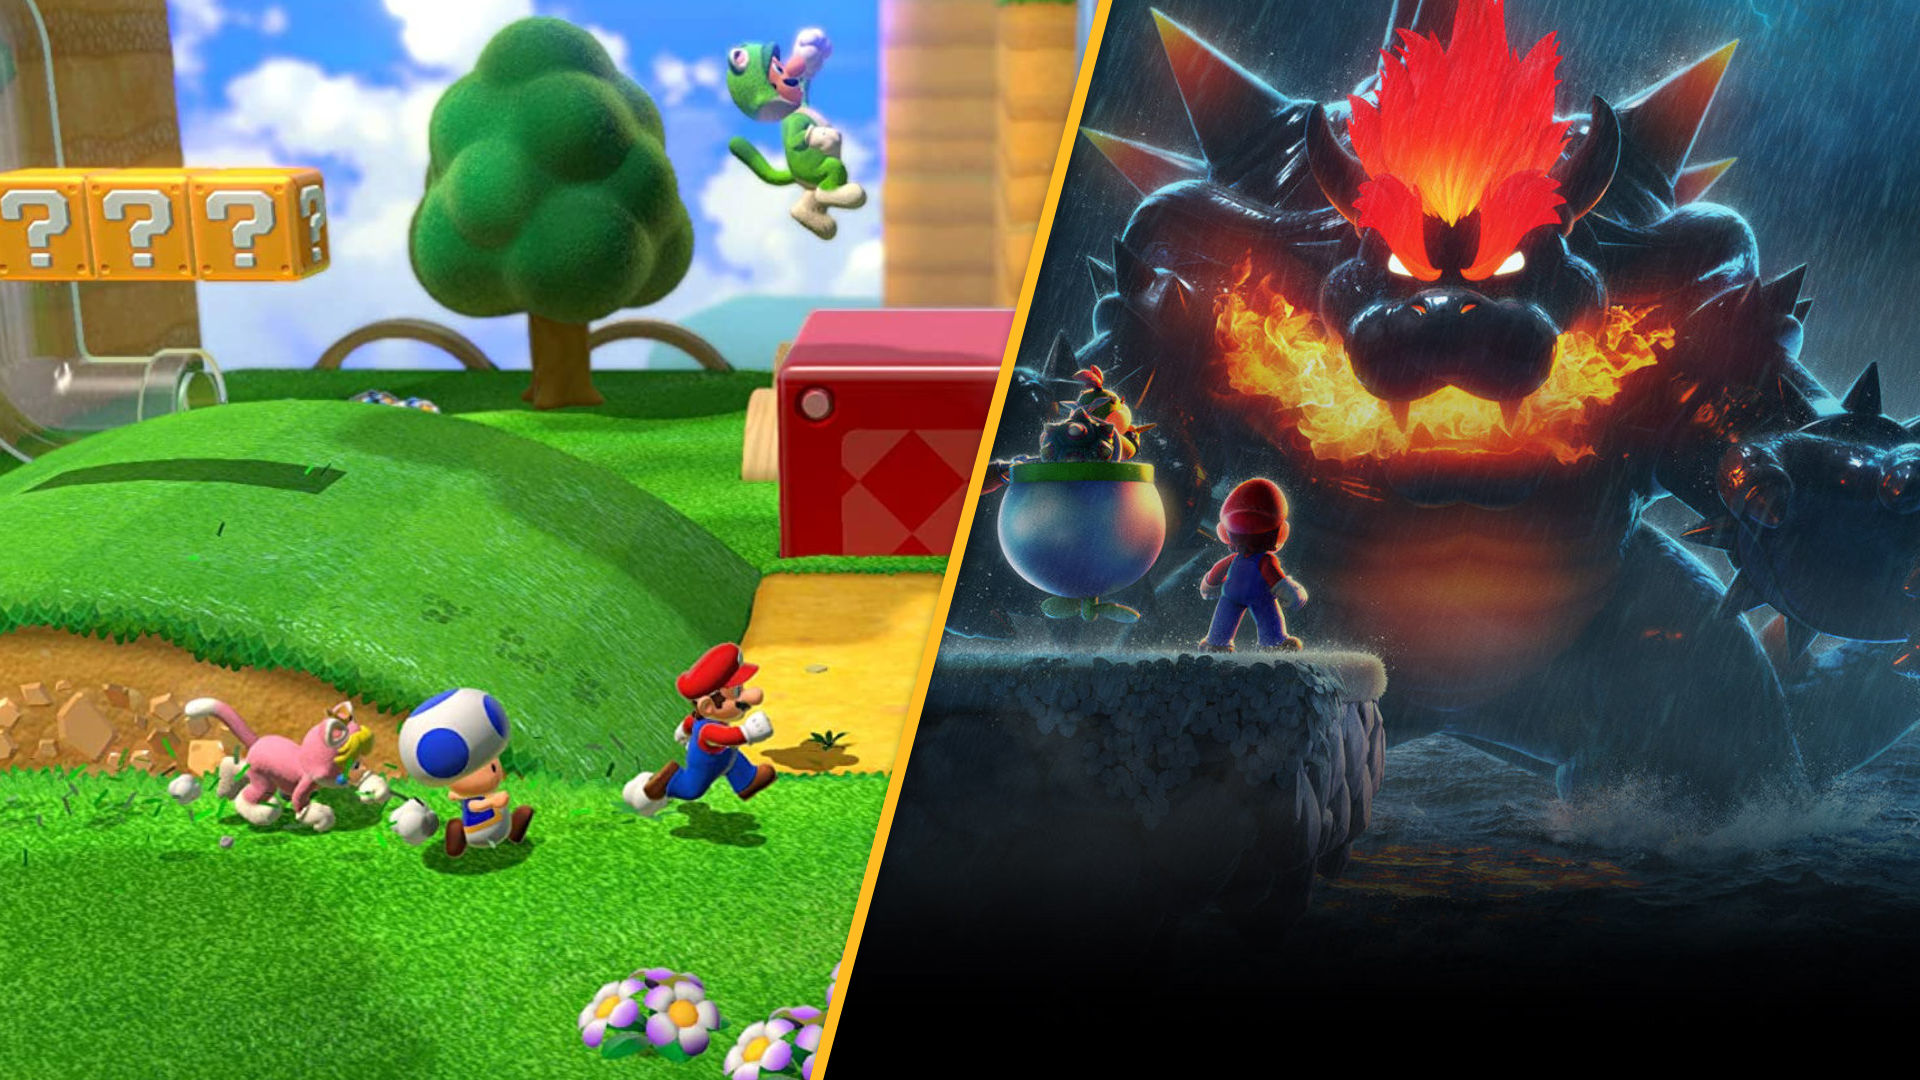 Bowser's Fury Makes Super Mario 3D World a Great Nintendo Game - Review